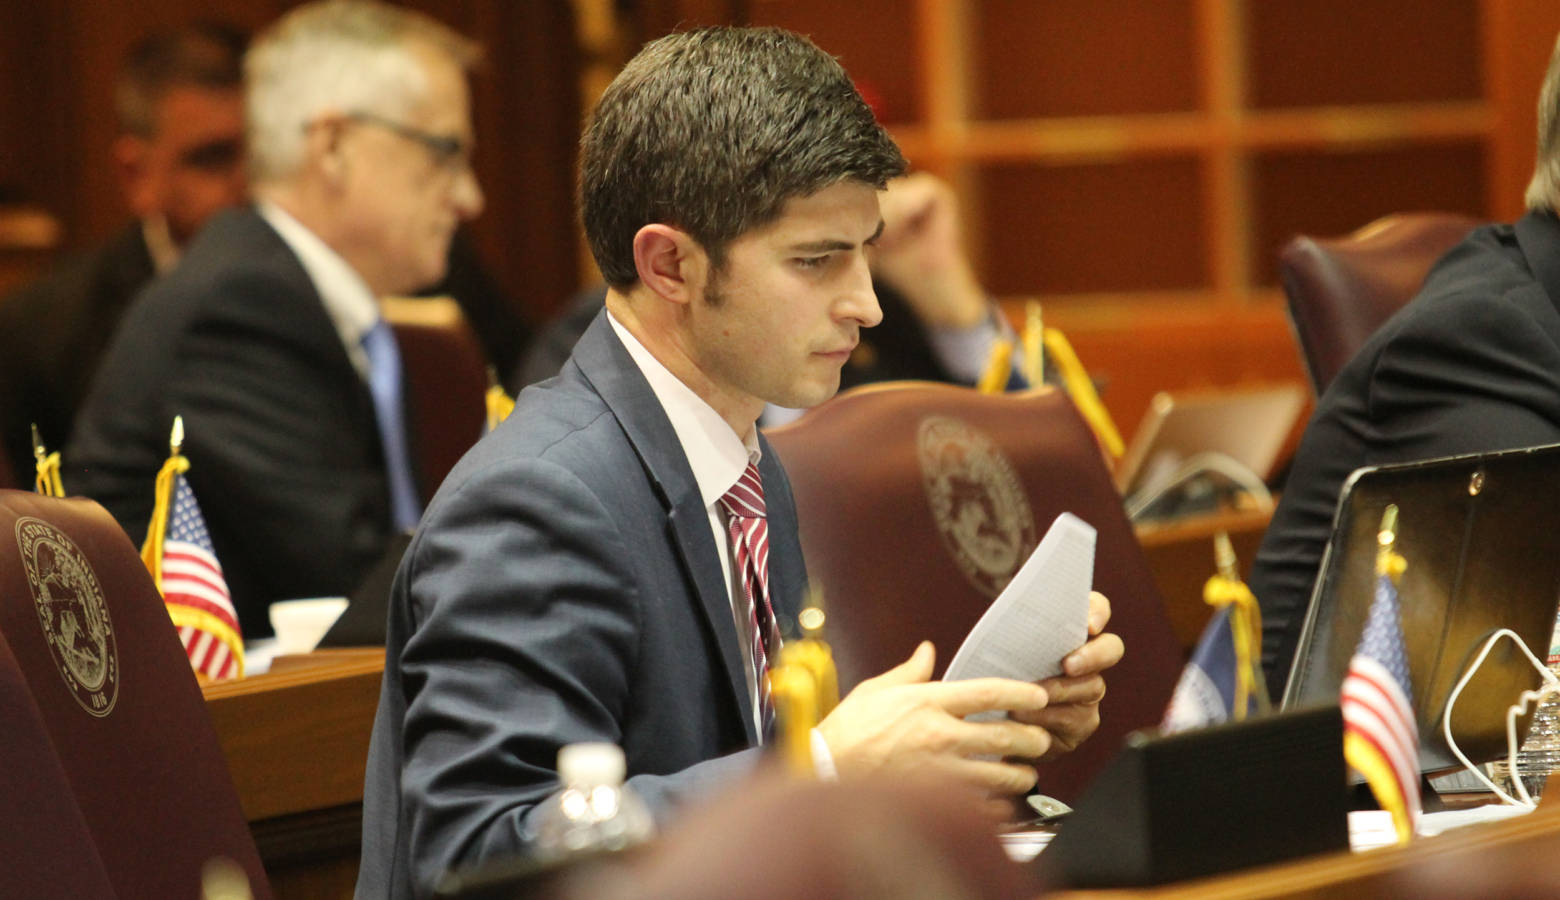 Rep. Tim Wesco (R-Osceola) wanted the bill to require grocery stores keep their alcohol in one area. (Lauren Chapman/IPB News)